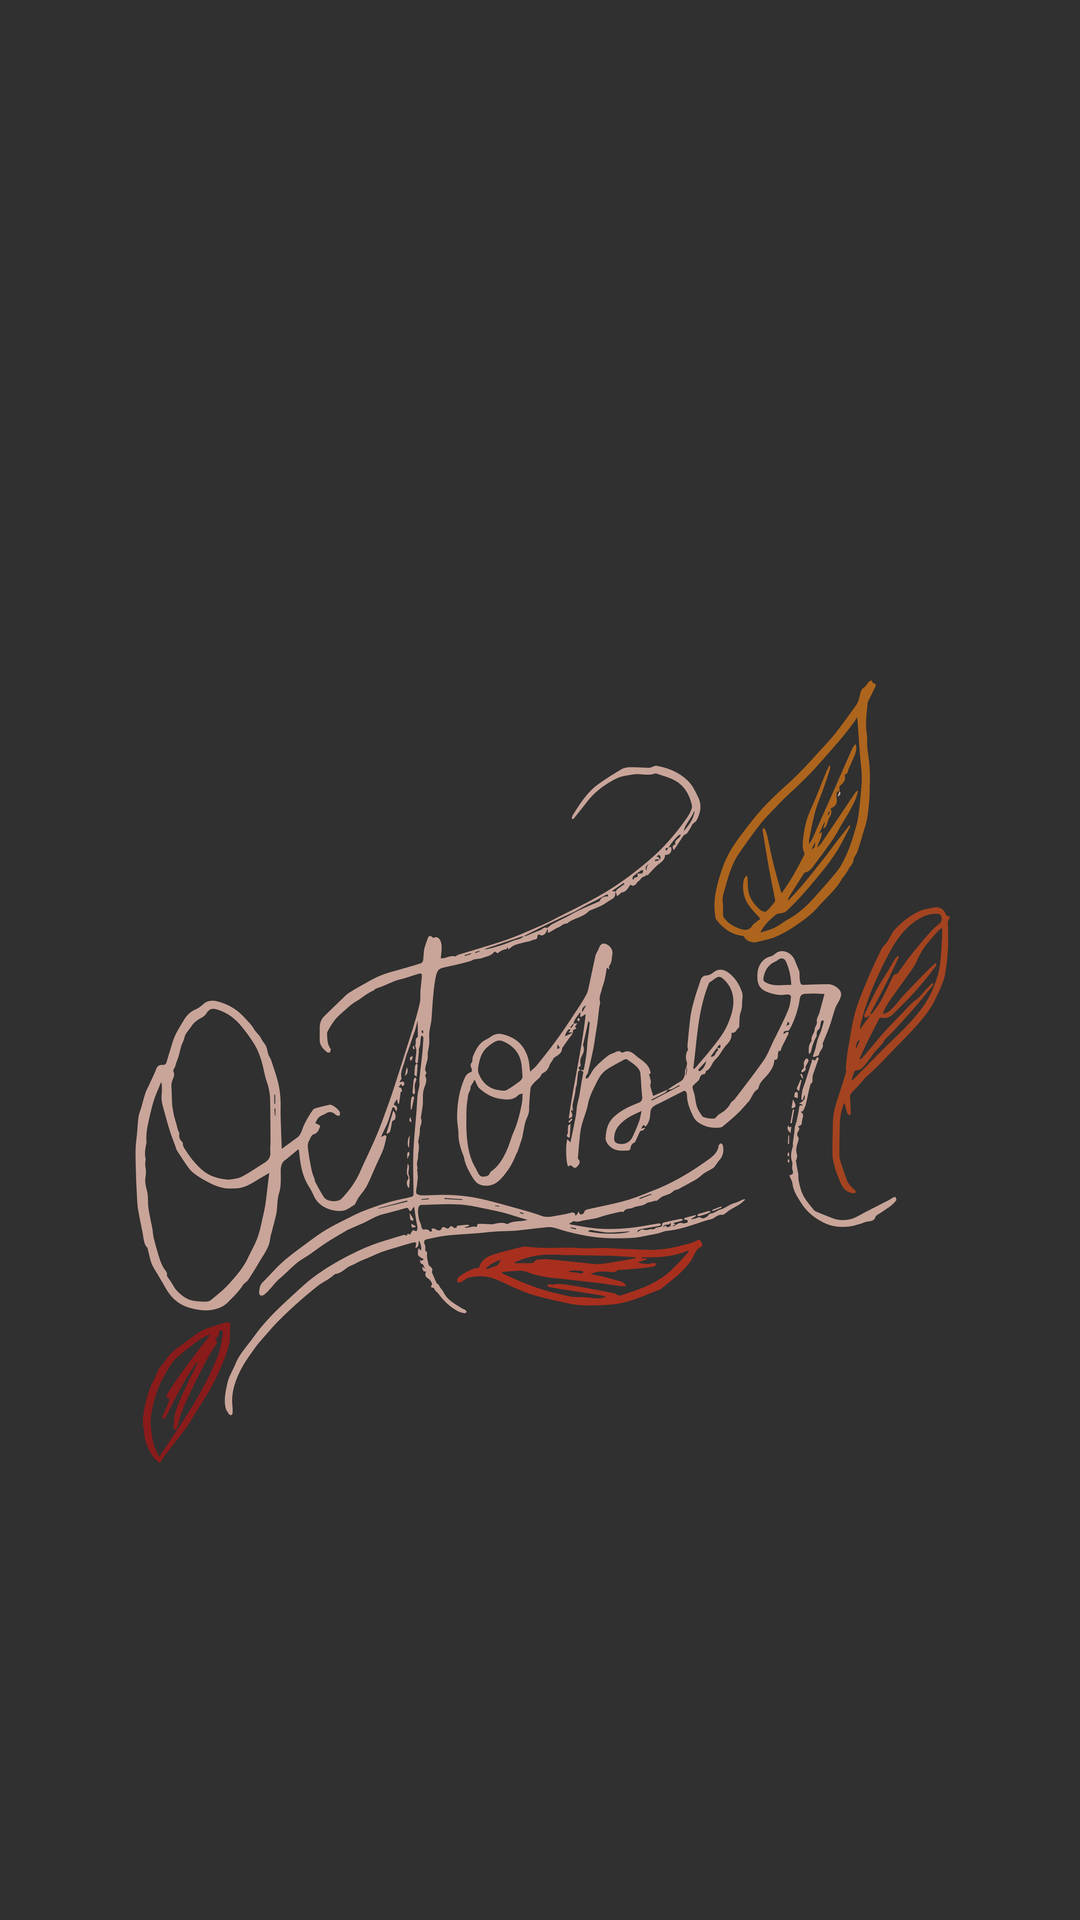 5175X9200 October Wallpaper and Background